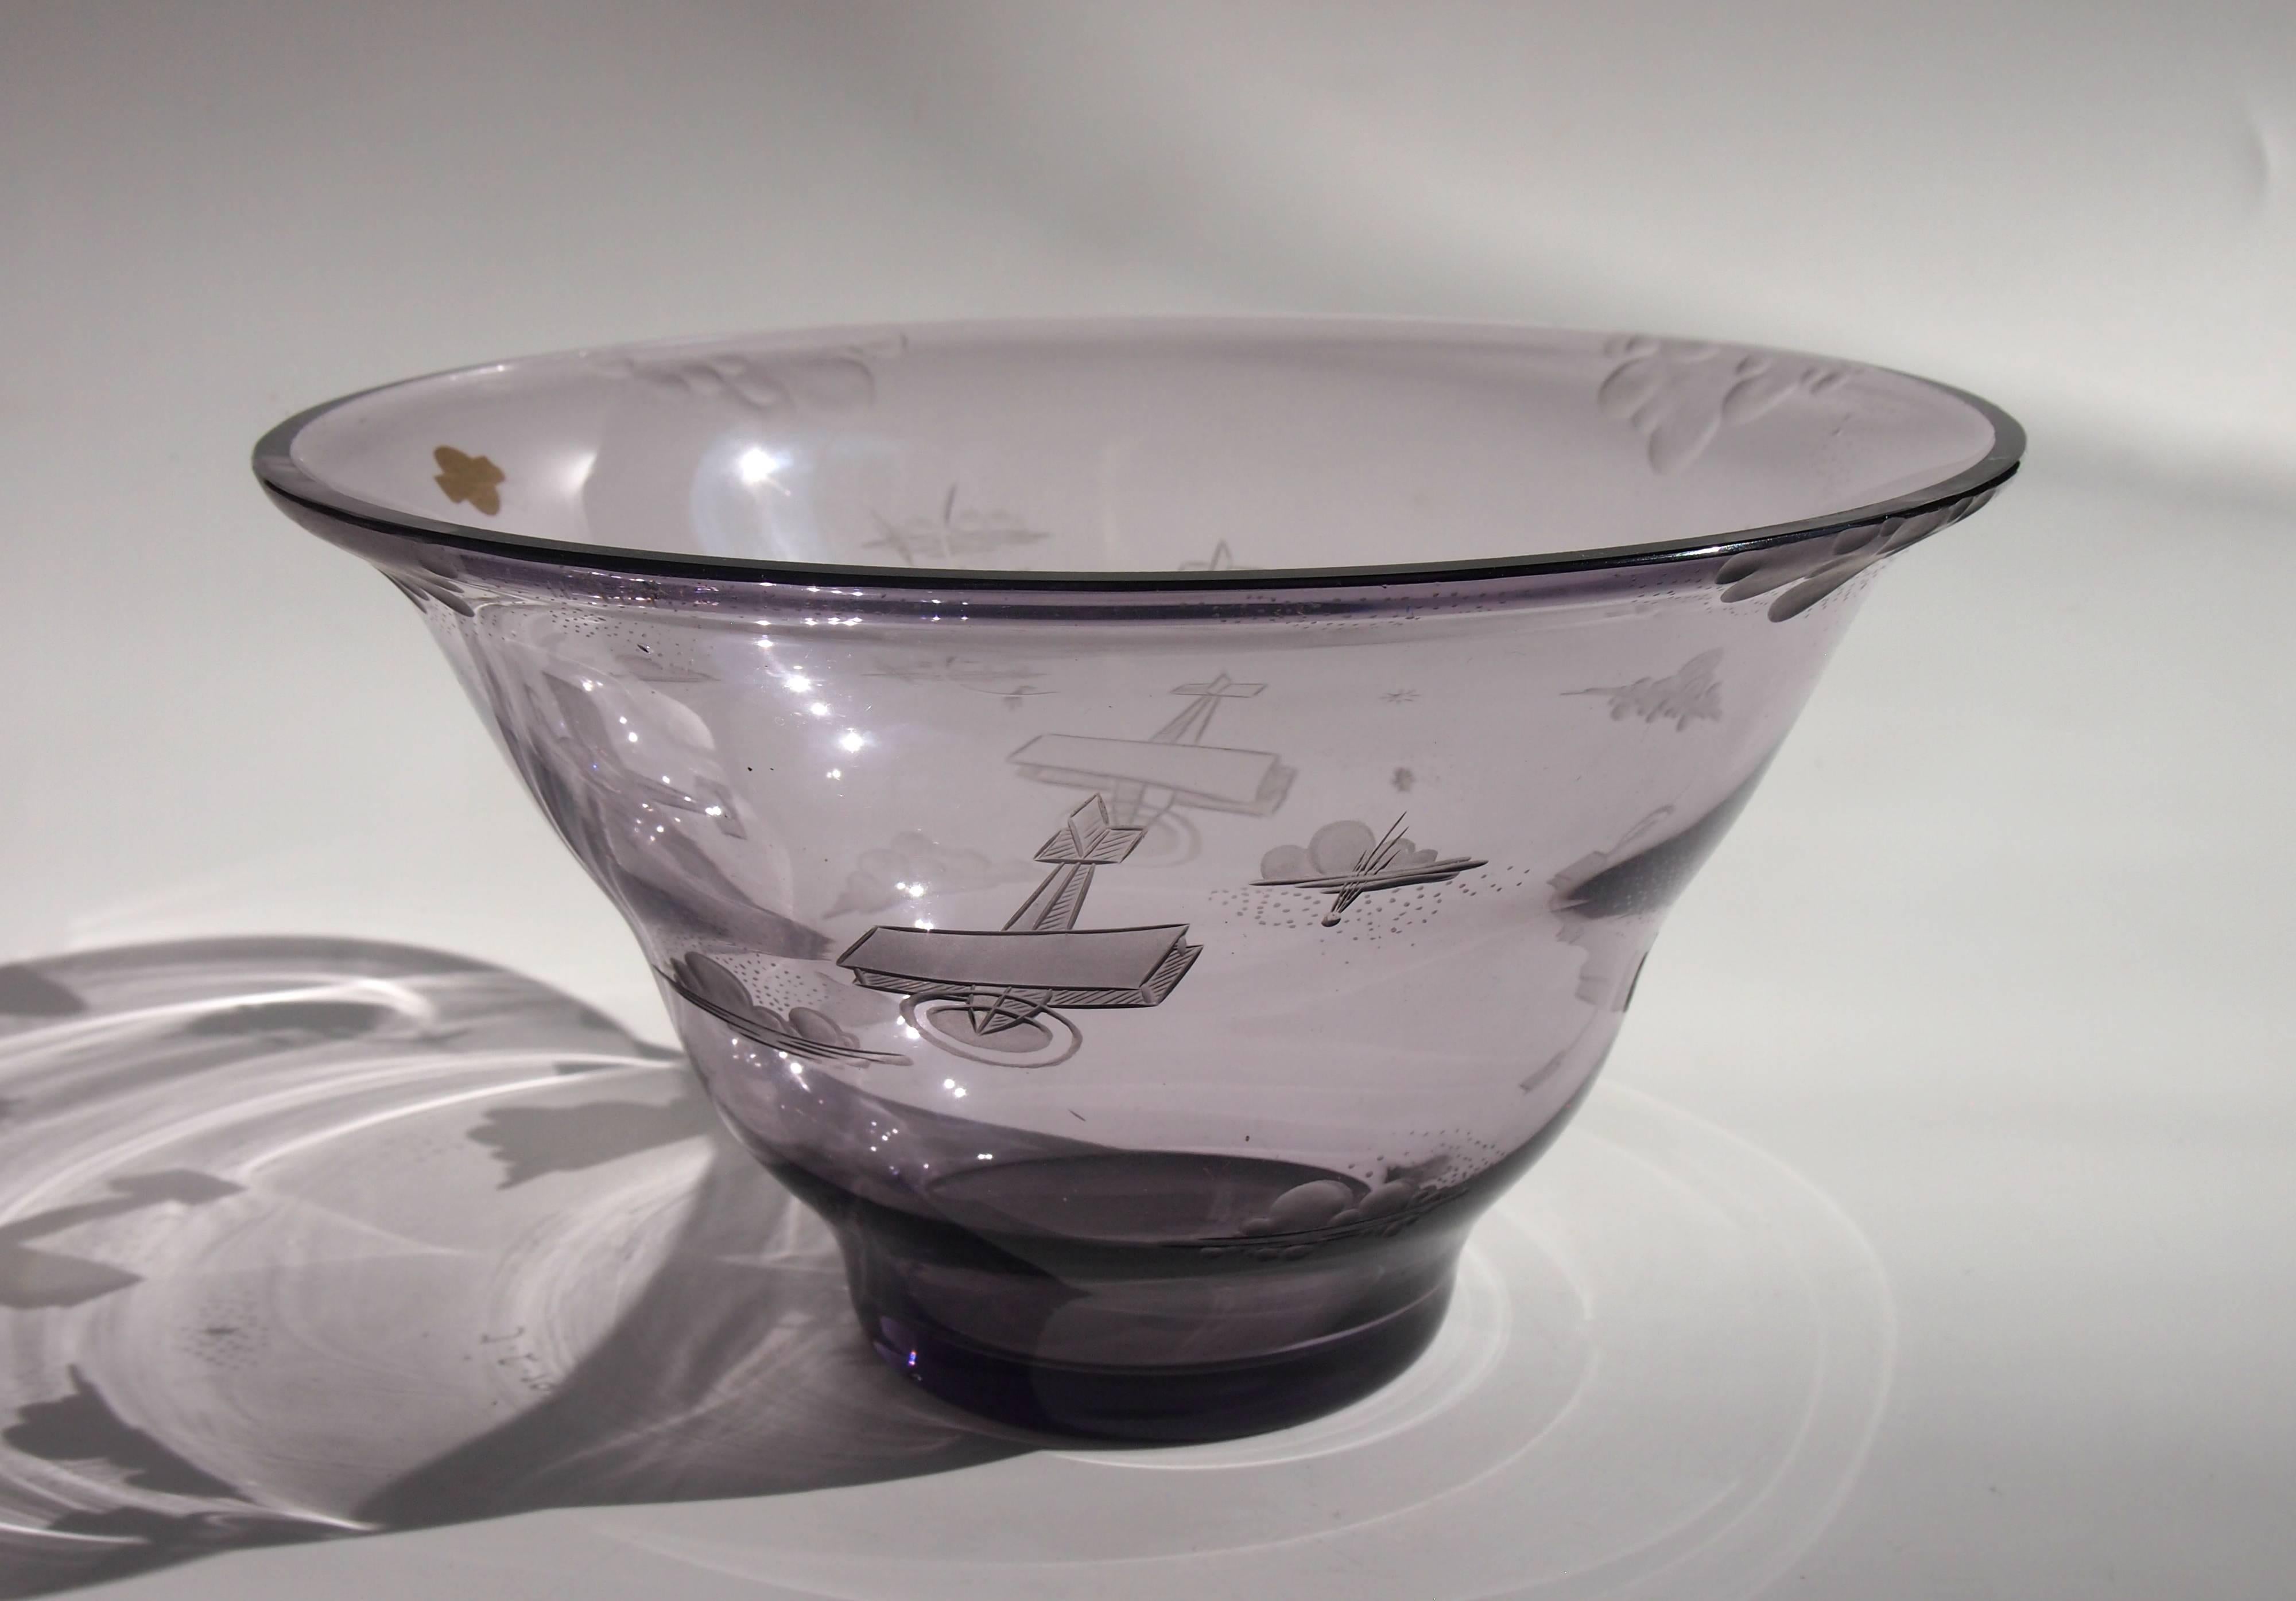 A very rare signed and dated bowl from the Zelezny Brod glass school, signed J L and dated 1937 (alas we do not know who J L was) it also has the original Zelezny Brod school label, the blank (undecorated bowl) is almost certainly by Riedel.